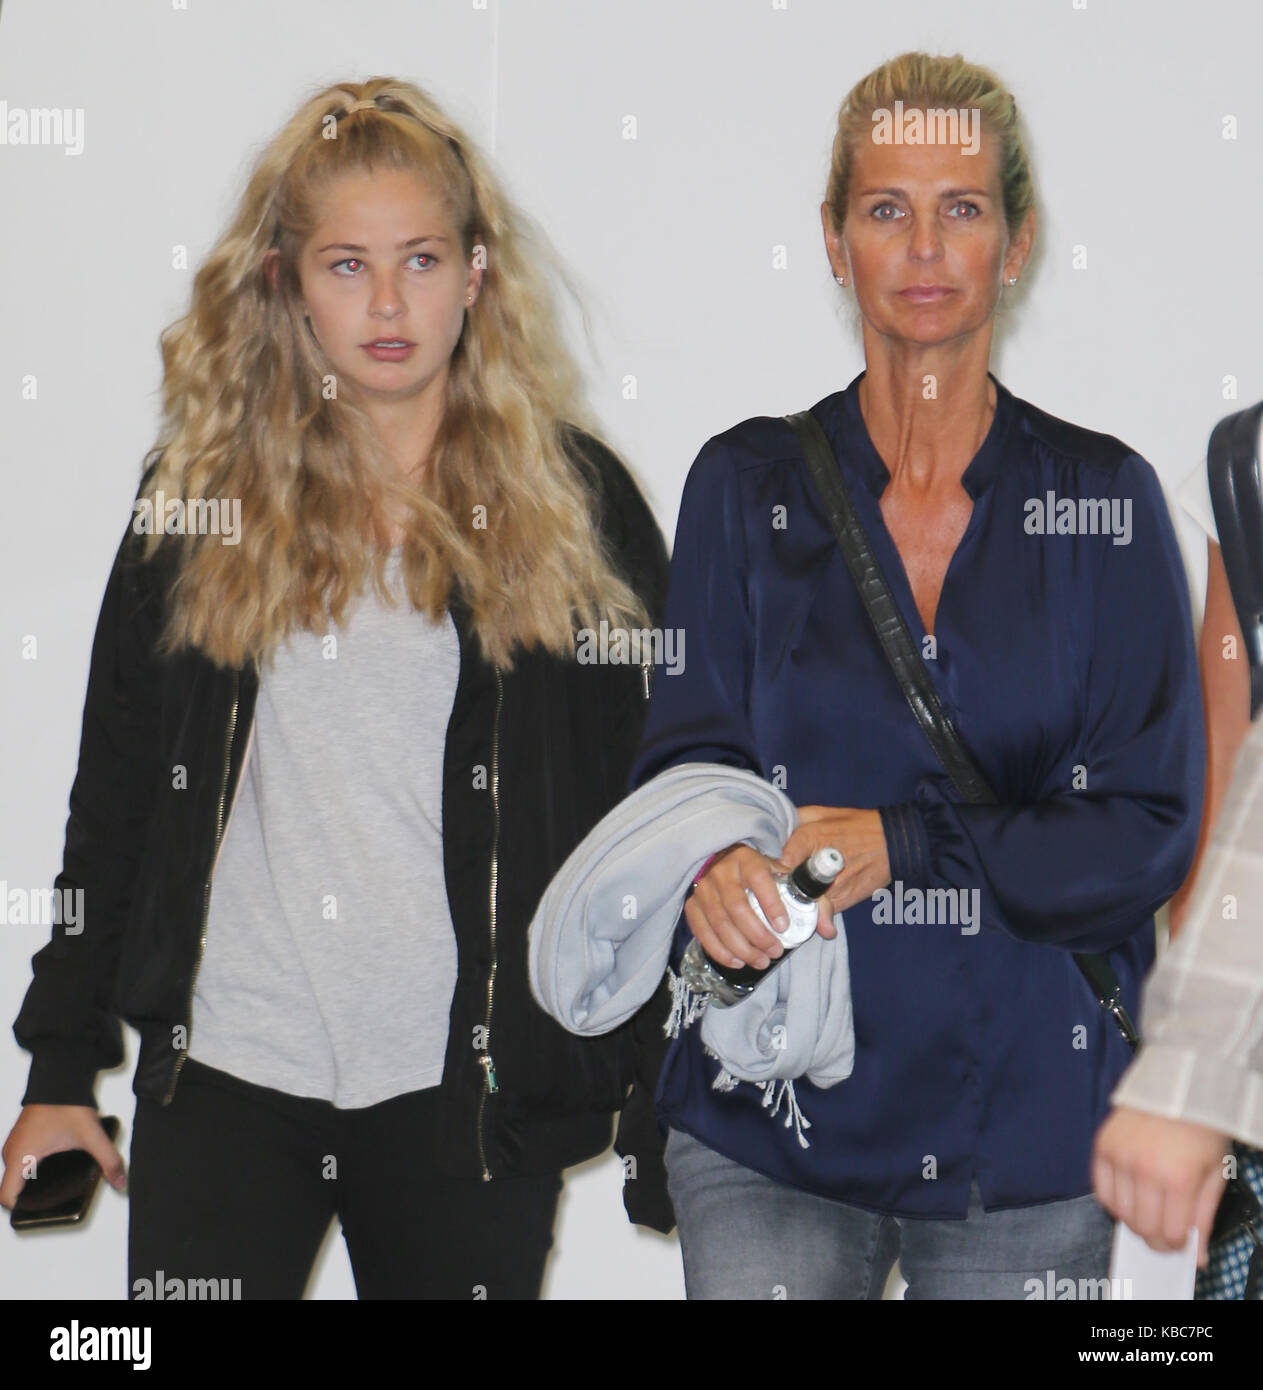 Ulrika Jonsson And Her Daughter Outside Itv Studios Featuring Ulrika Jonsson Where London United Kingdom When 29 Aug 2017 Credit Rocky Wenn Com Stock Photo Alamy